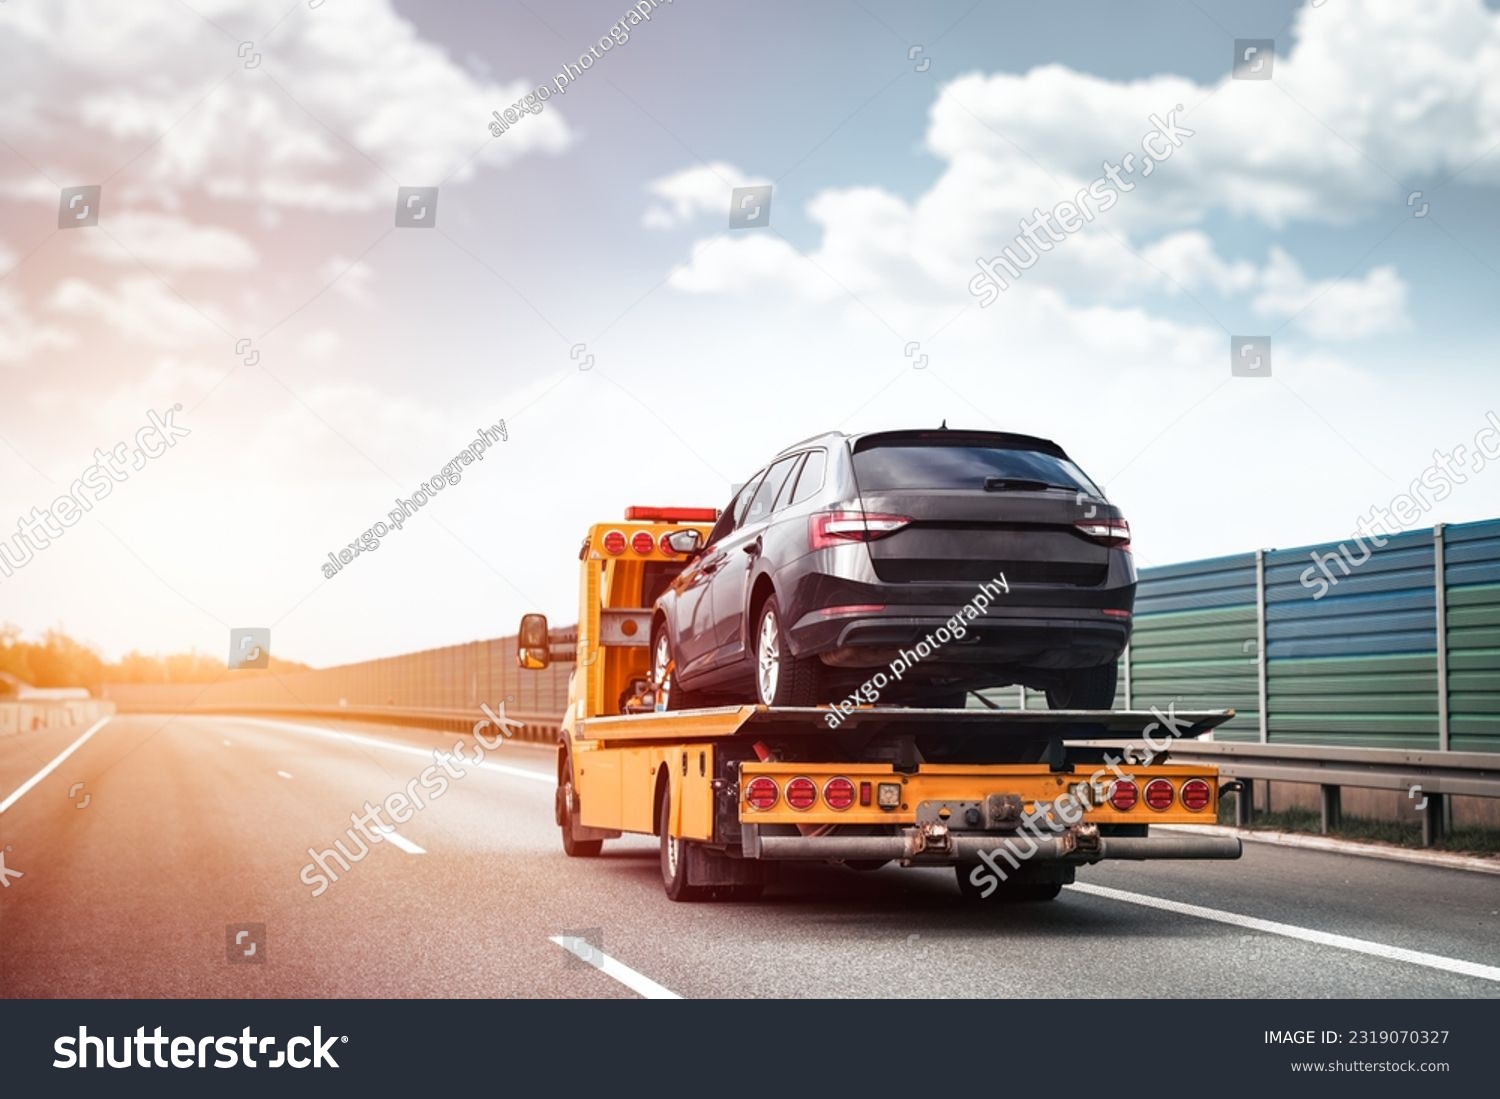 Reliable Towing and Recovery Services: 24-7 Assistance for Vehicle Breakdowns and Accidents. Emergency roadside assistance on the highway. side view of the flatbed tow truck with a damaged vehicle #2319070327